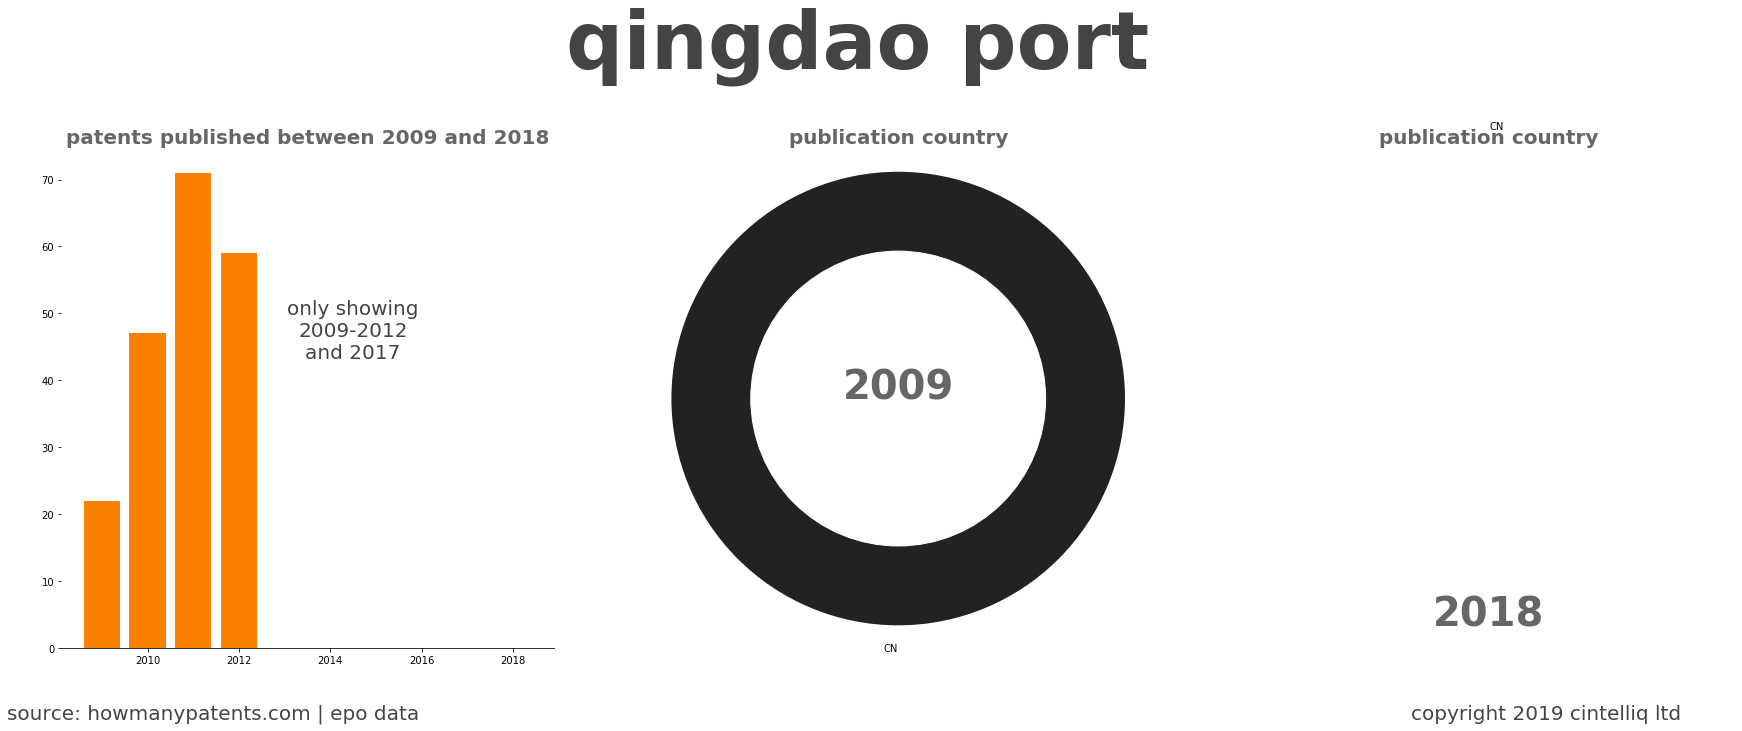 summary of patents for Qingdao Port 